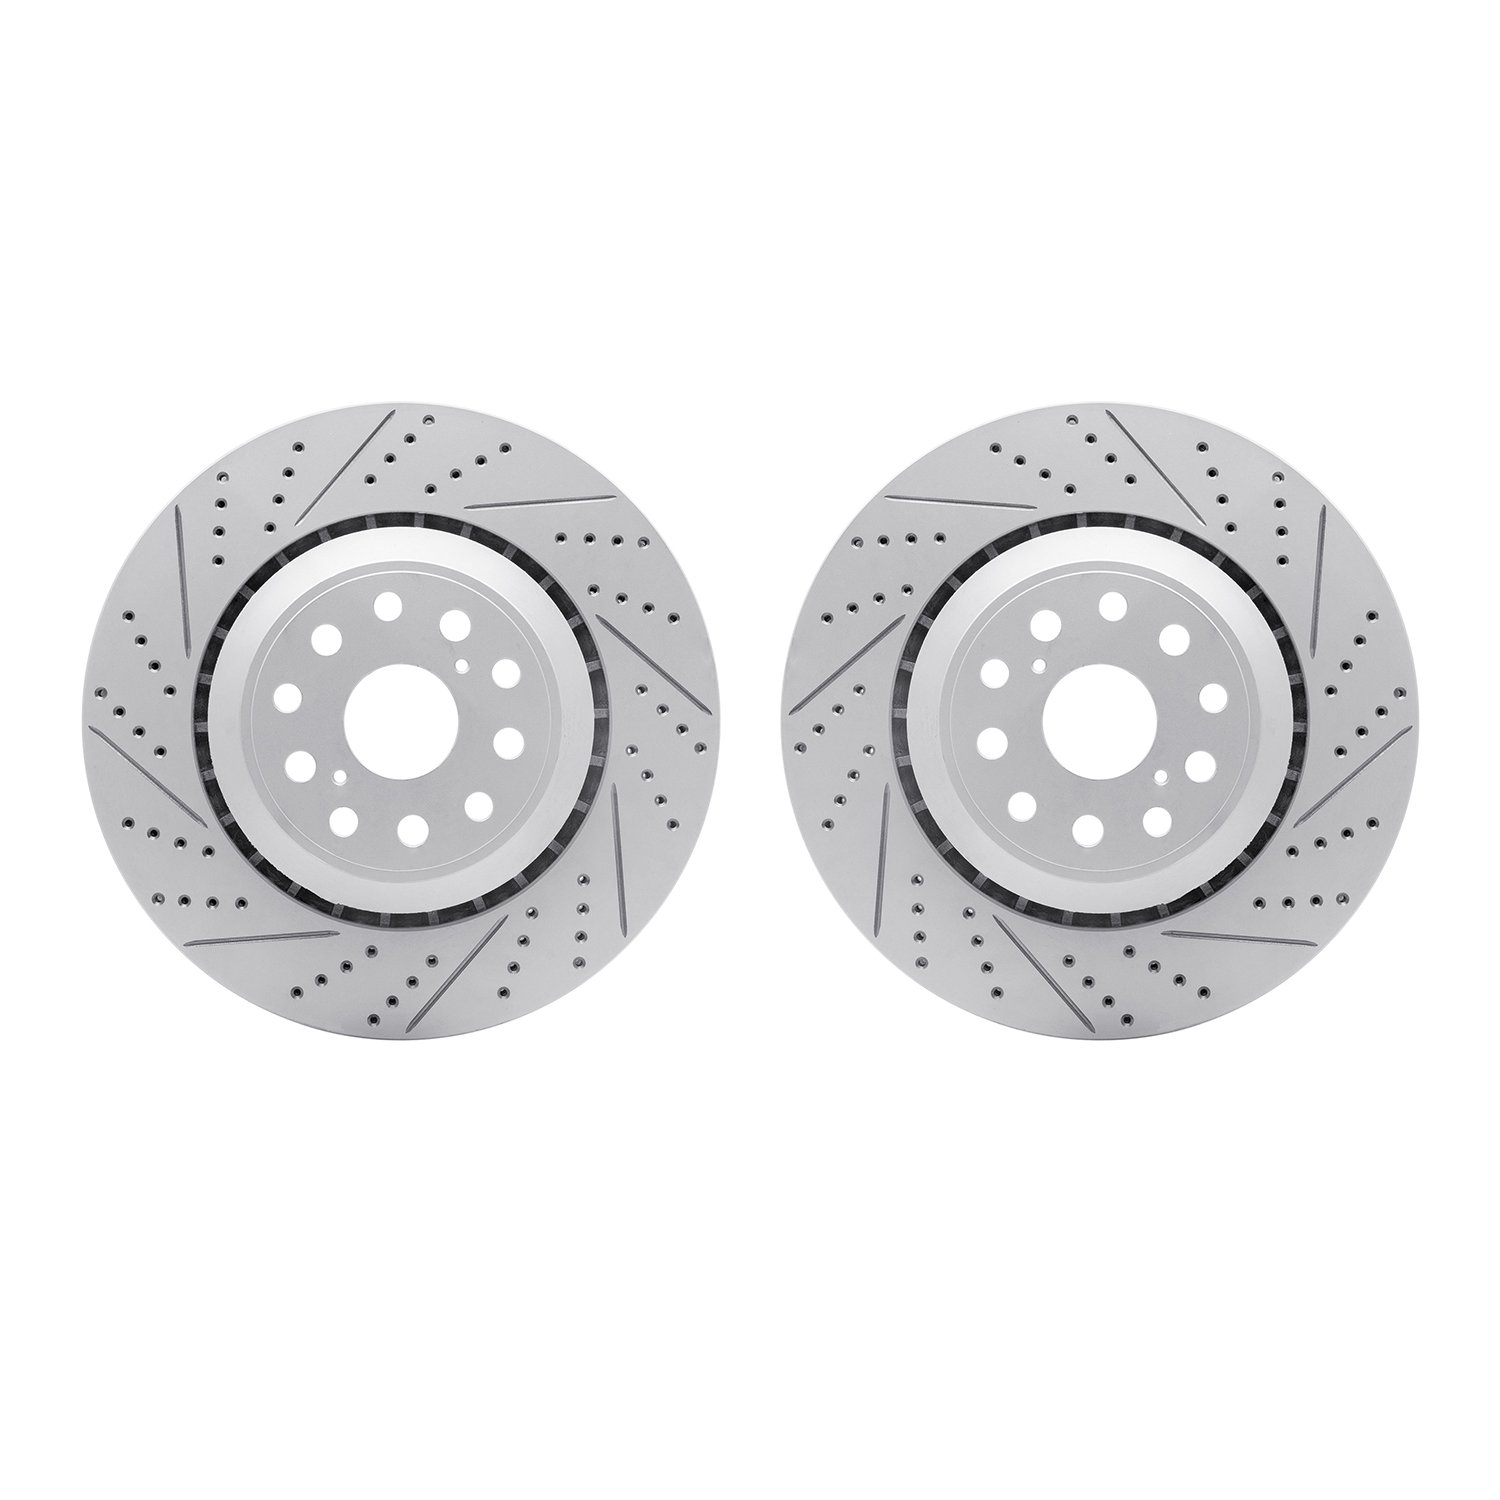 2002-75024 Geoperformance Drilled/Slotted Brake Rotors, 2007-2021 Lexus/Toyota/Scion, Position: Rear